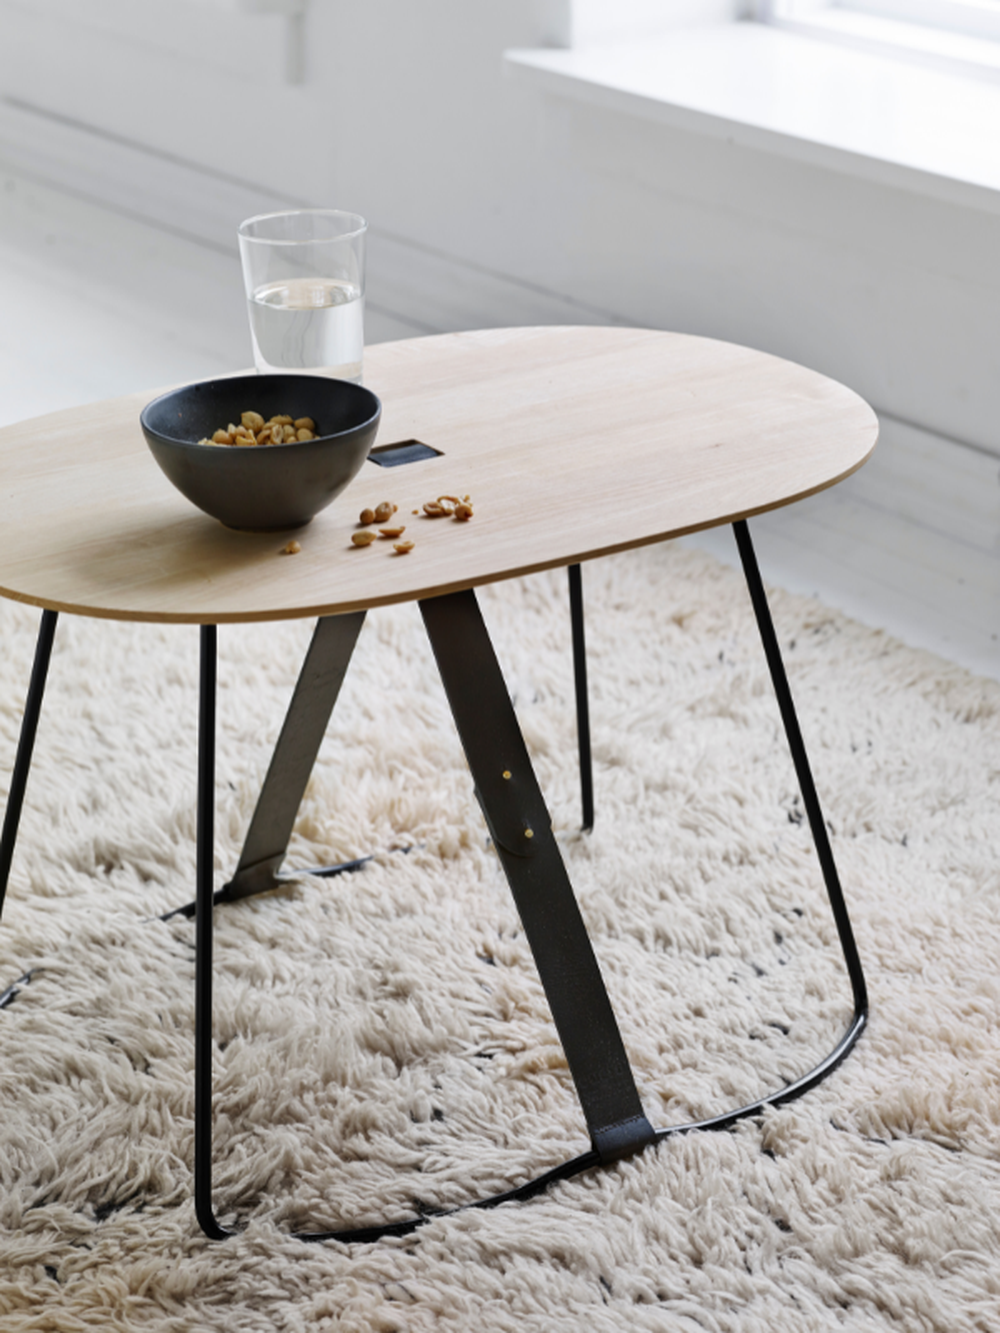 birchwood, steel and leather side table with peanuts and glass of water on rug